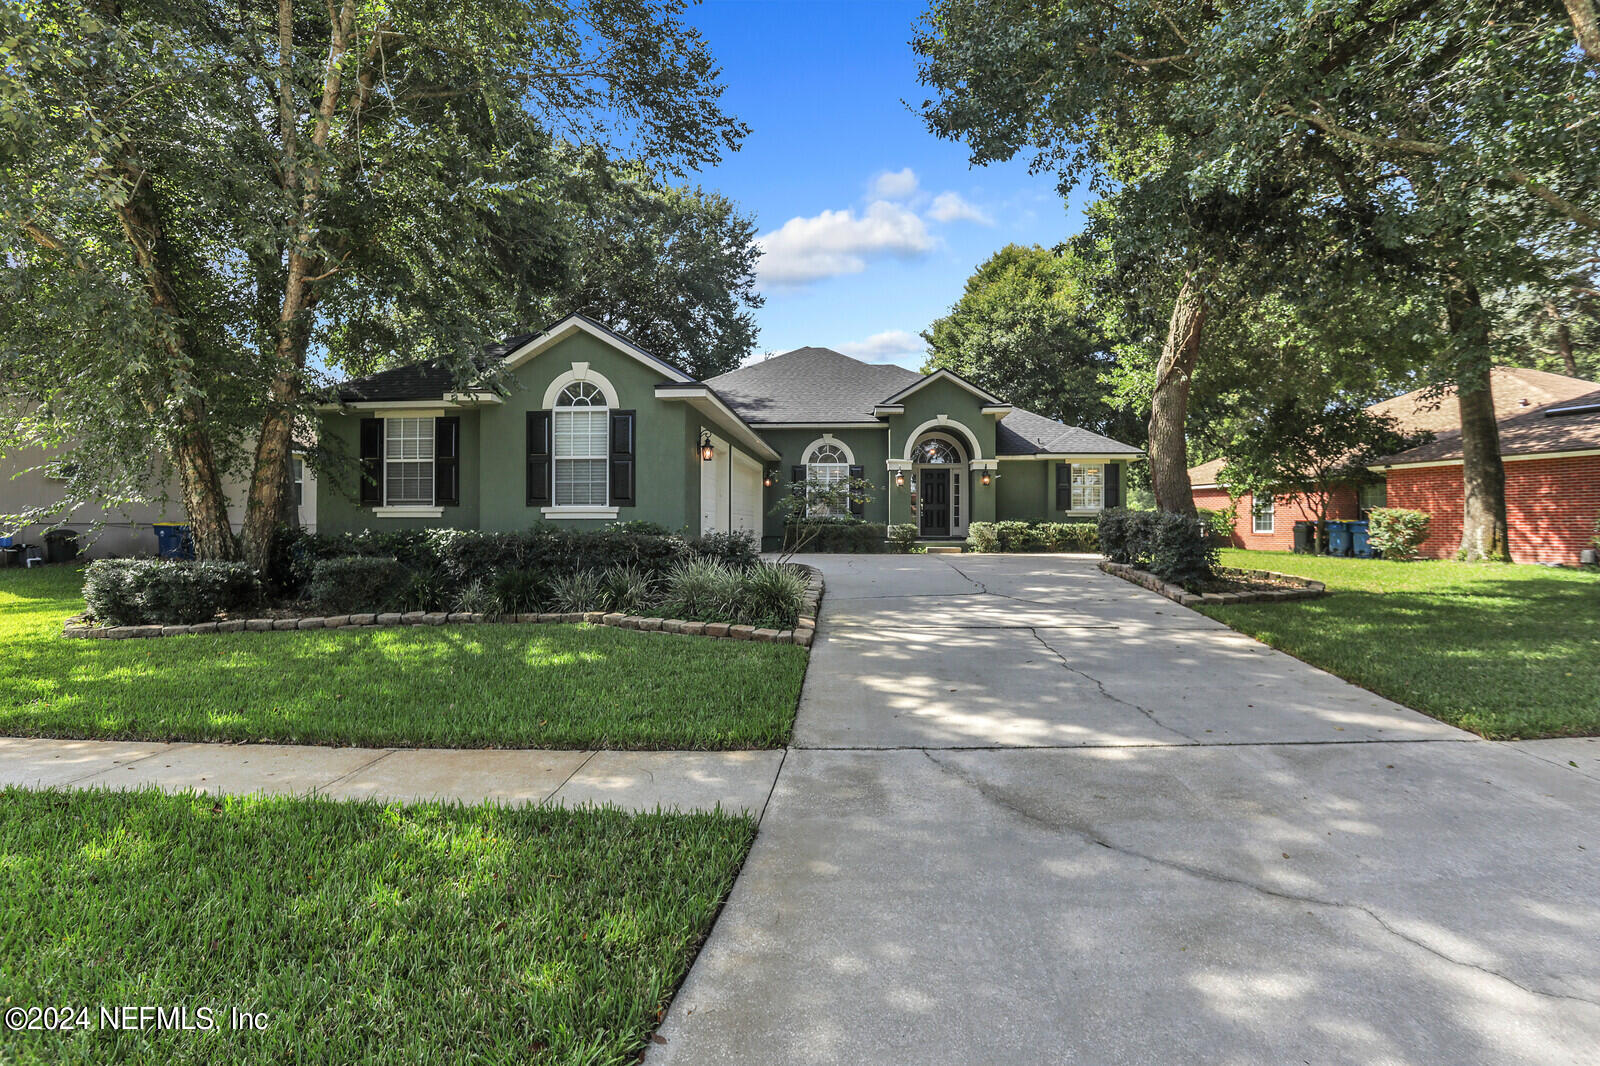 Jacksonville, FL home for sale located at 3054 DONATO Drive N, Jacksonville, FL 32226